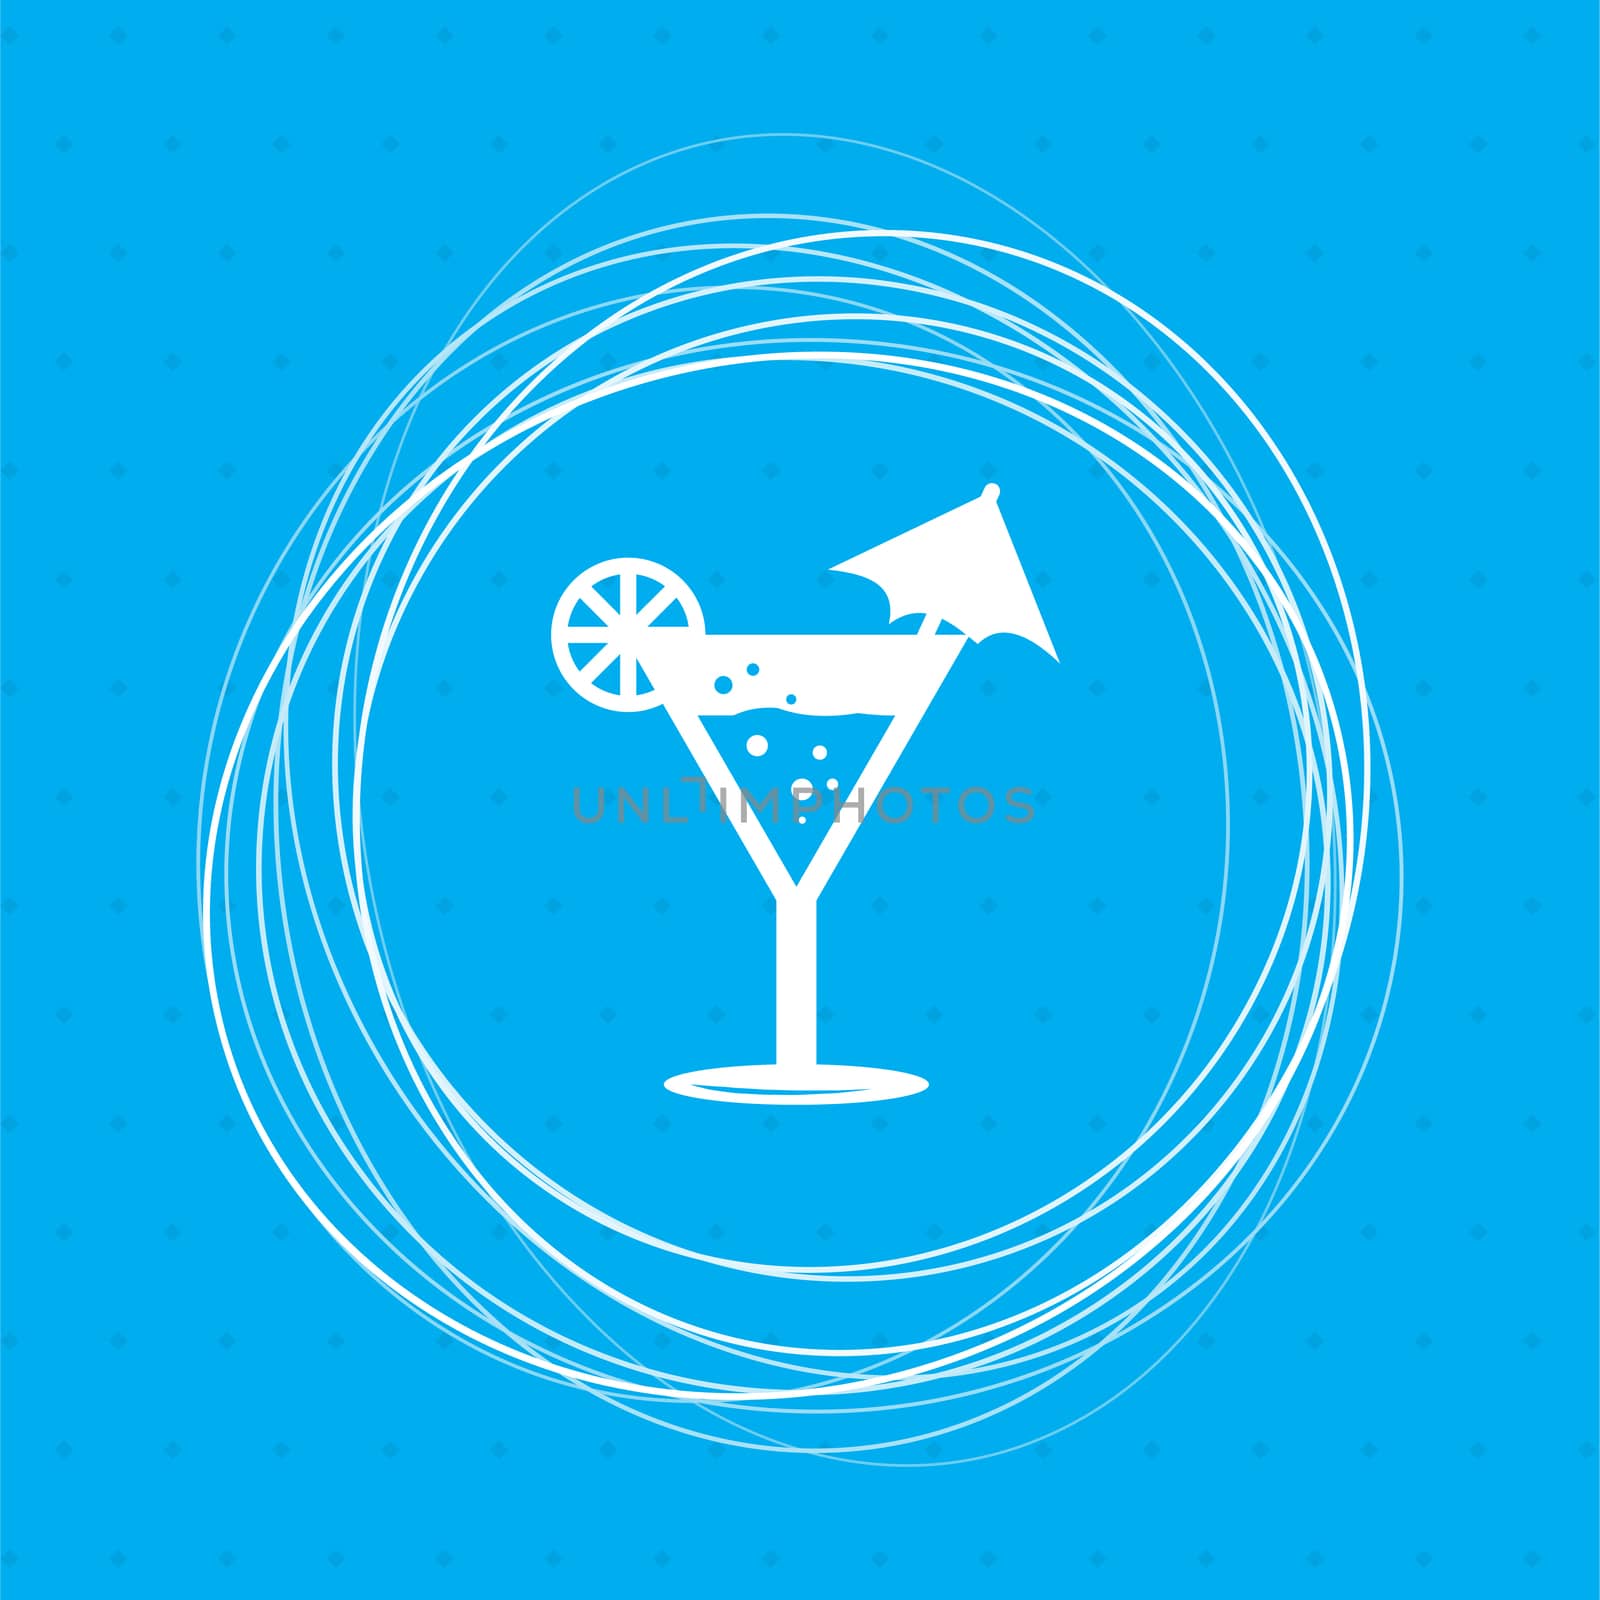 Cocktail party, martini icon on a blue background with abstract circles around and place for your text. illustration